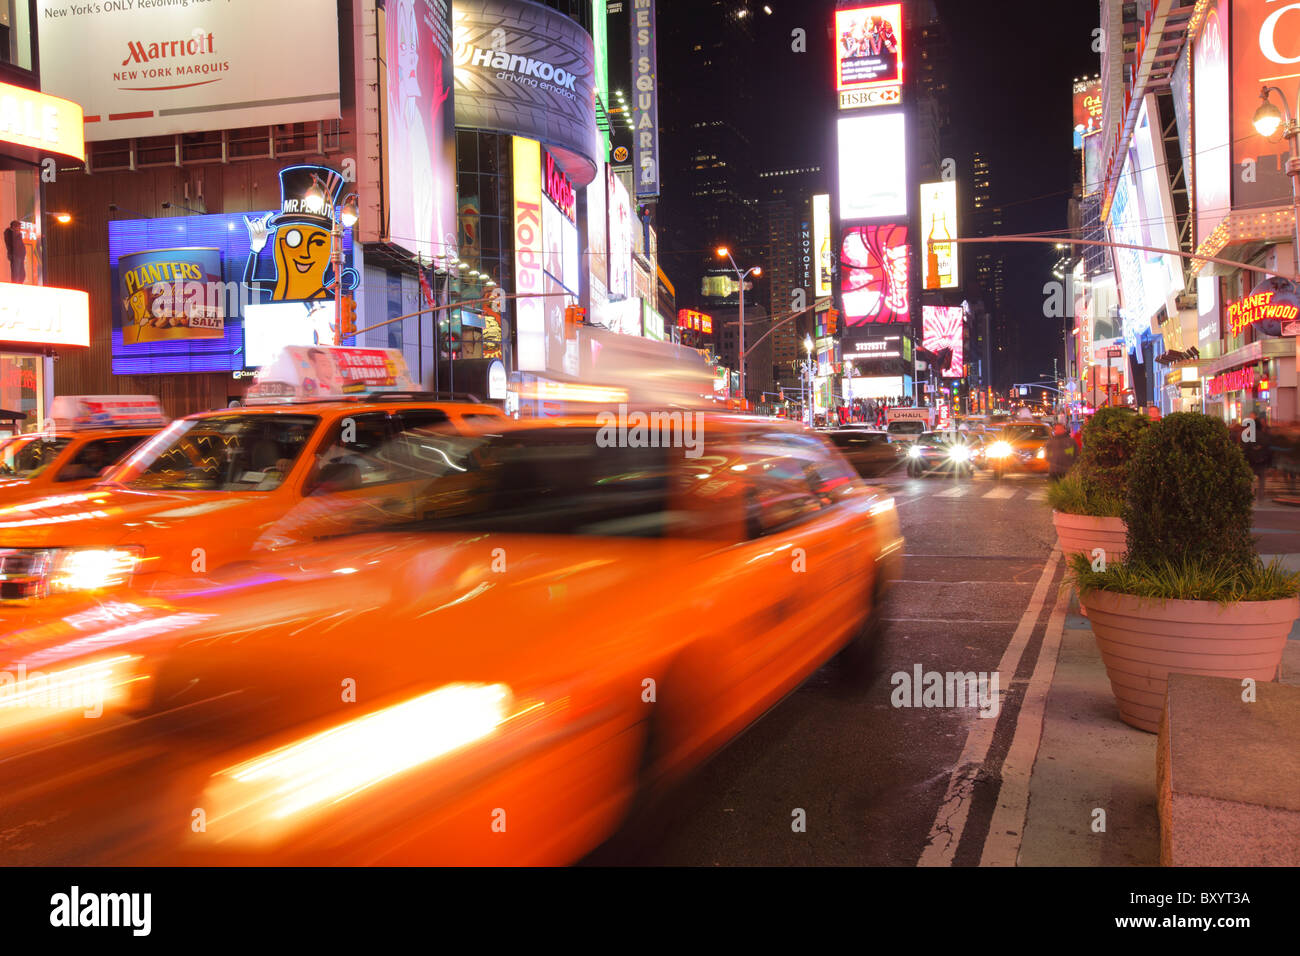 Taxi's driving, Times Square, Manhattan, New York City Stock Photo